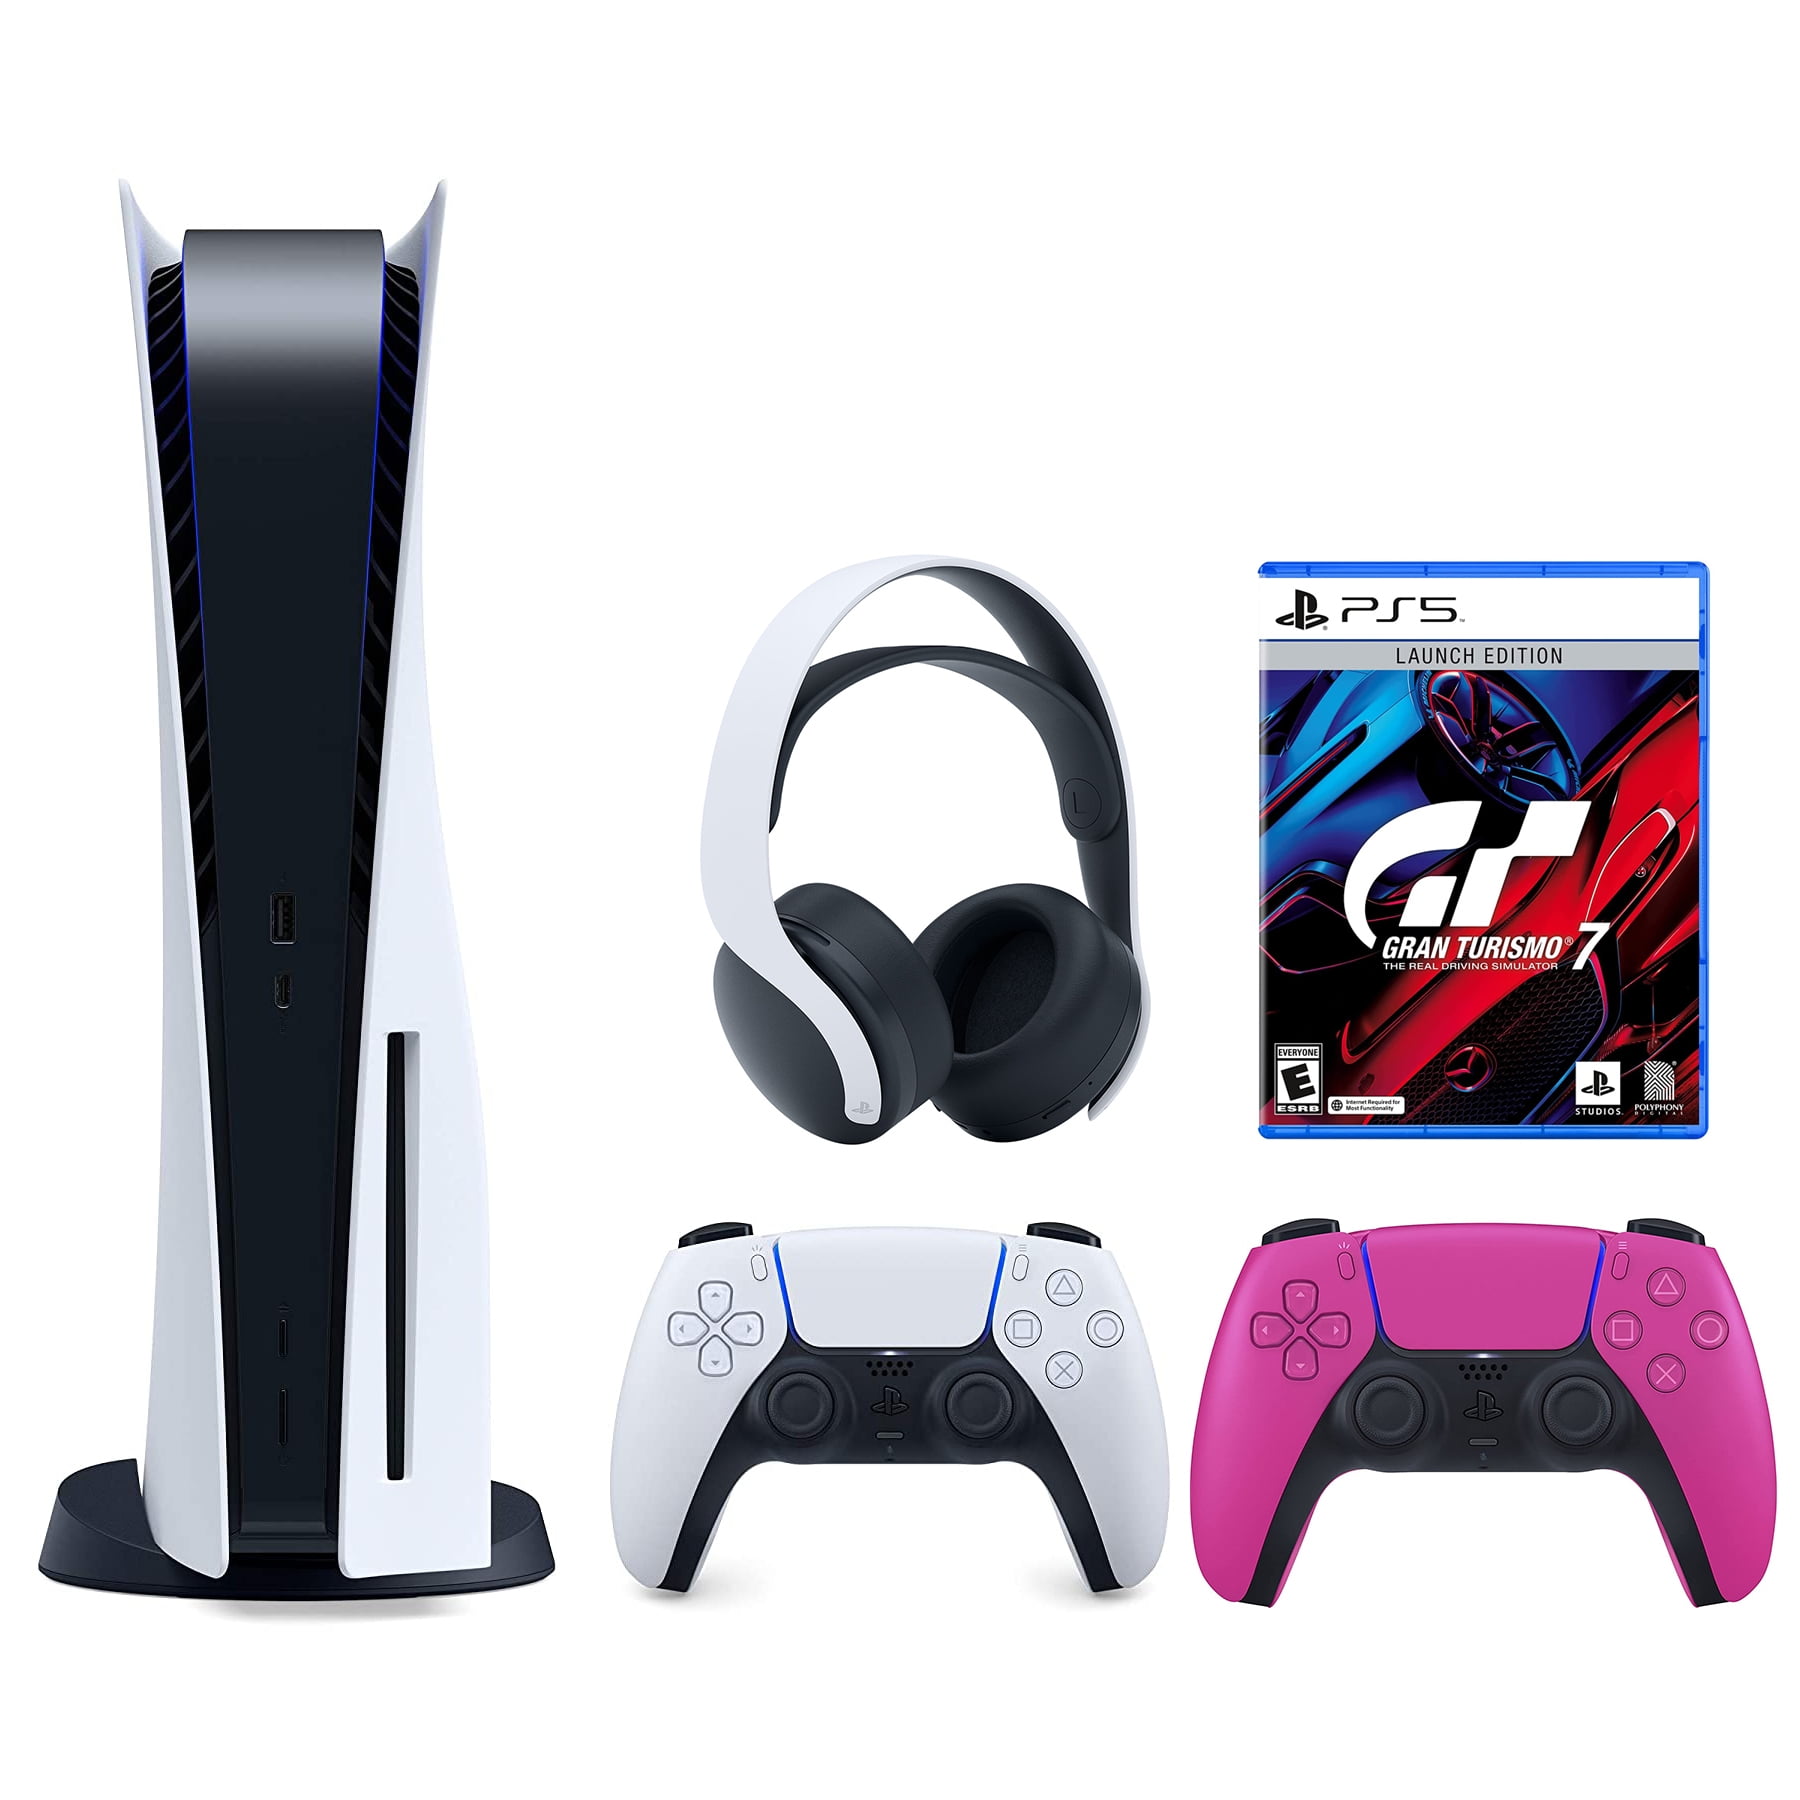 Sony Playstation 5 Disc (PS5 Disc) with Extra Pink Controller, Gran Turismo  7 Launch Edition and White PULSE 3D Headset Bundle